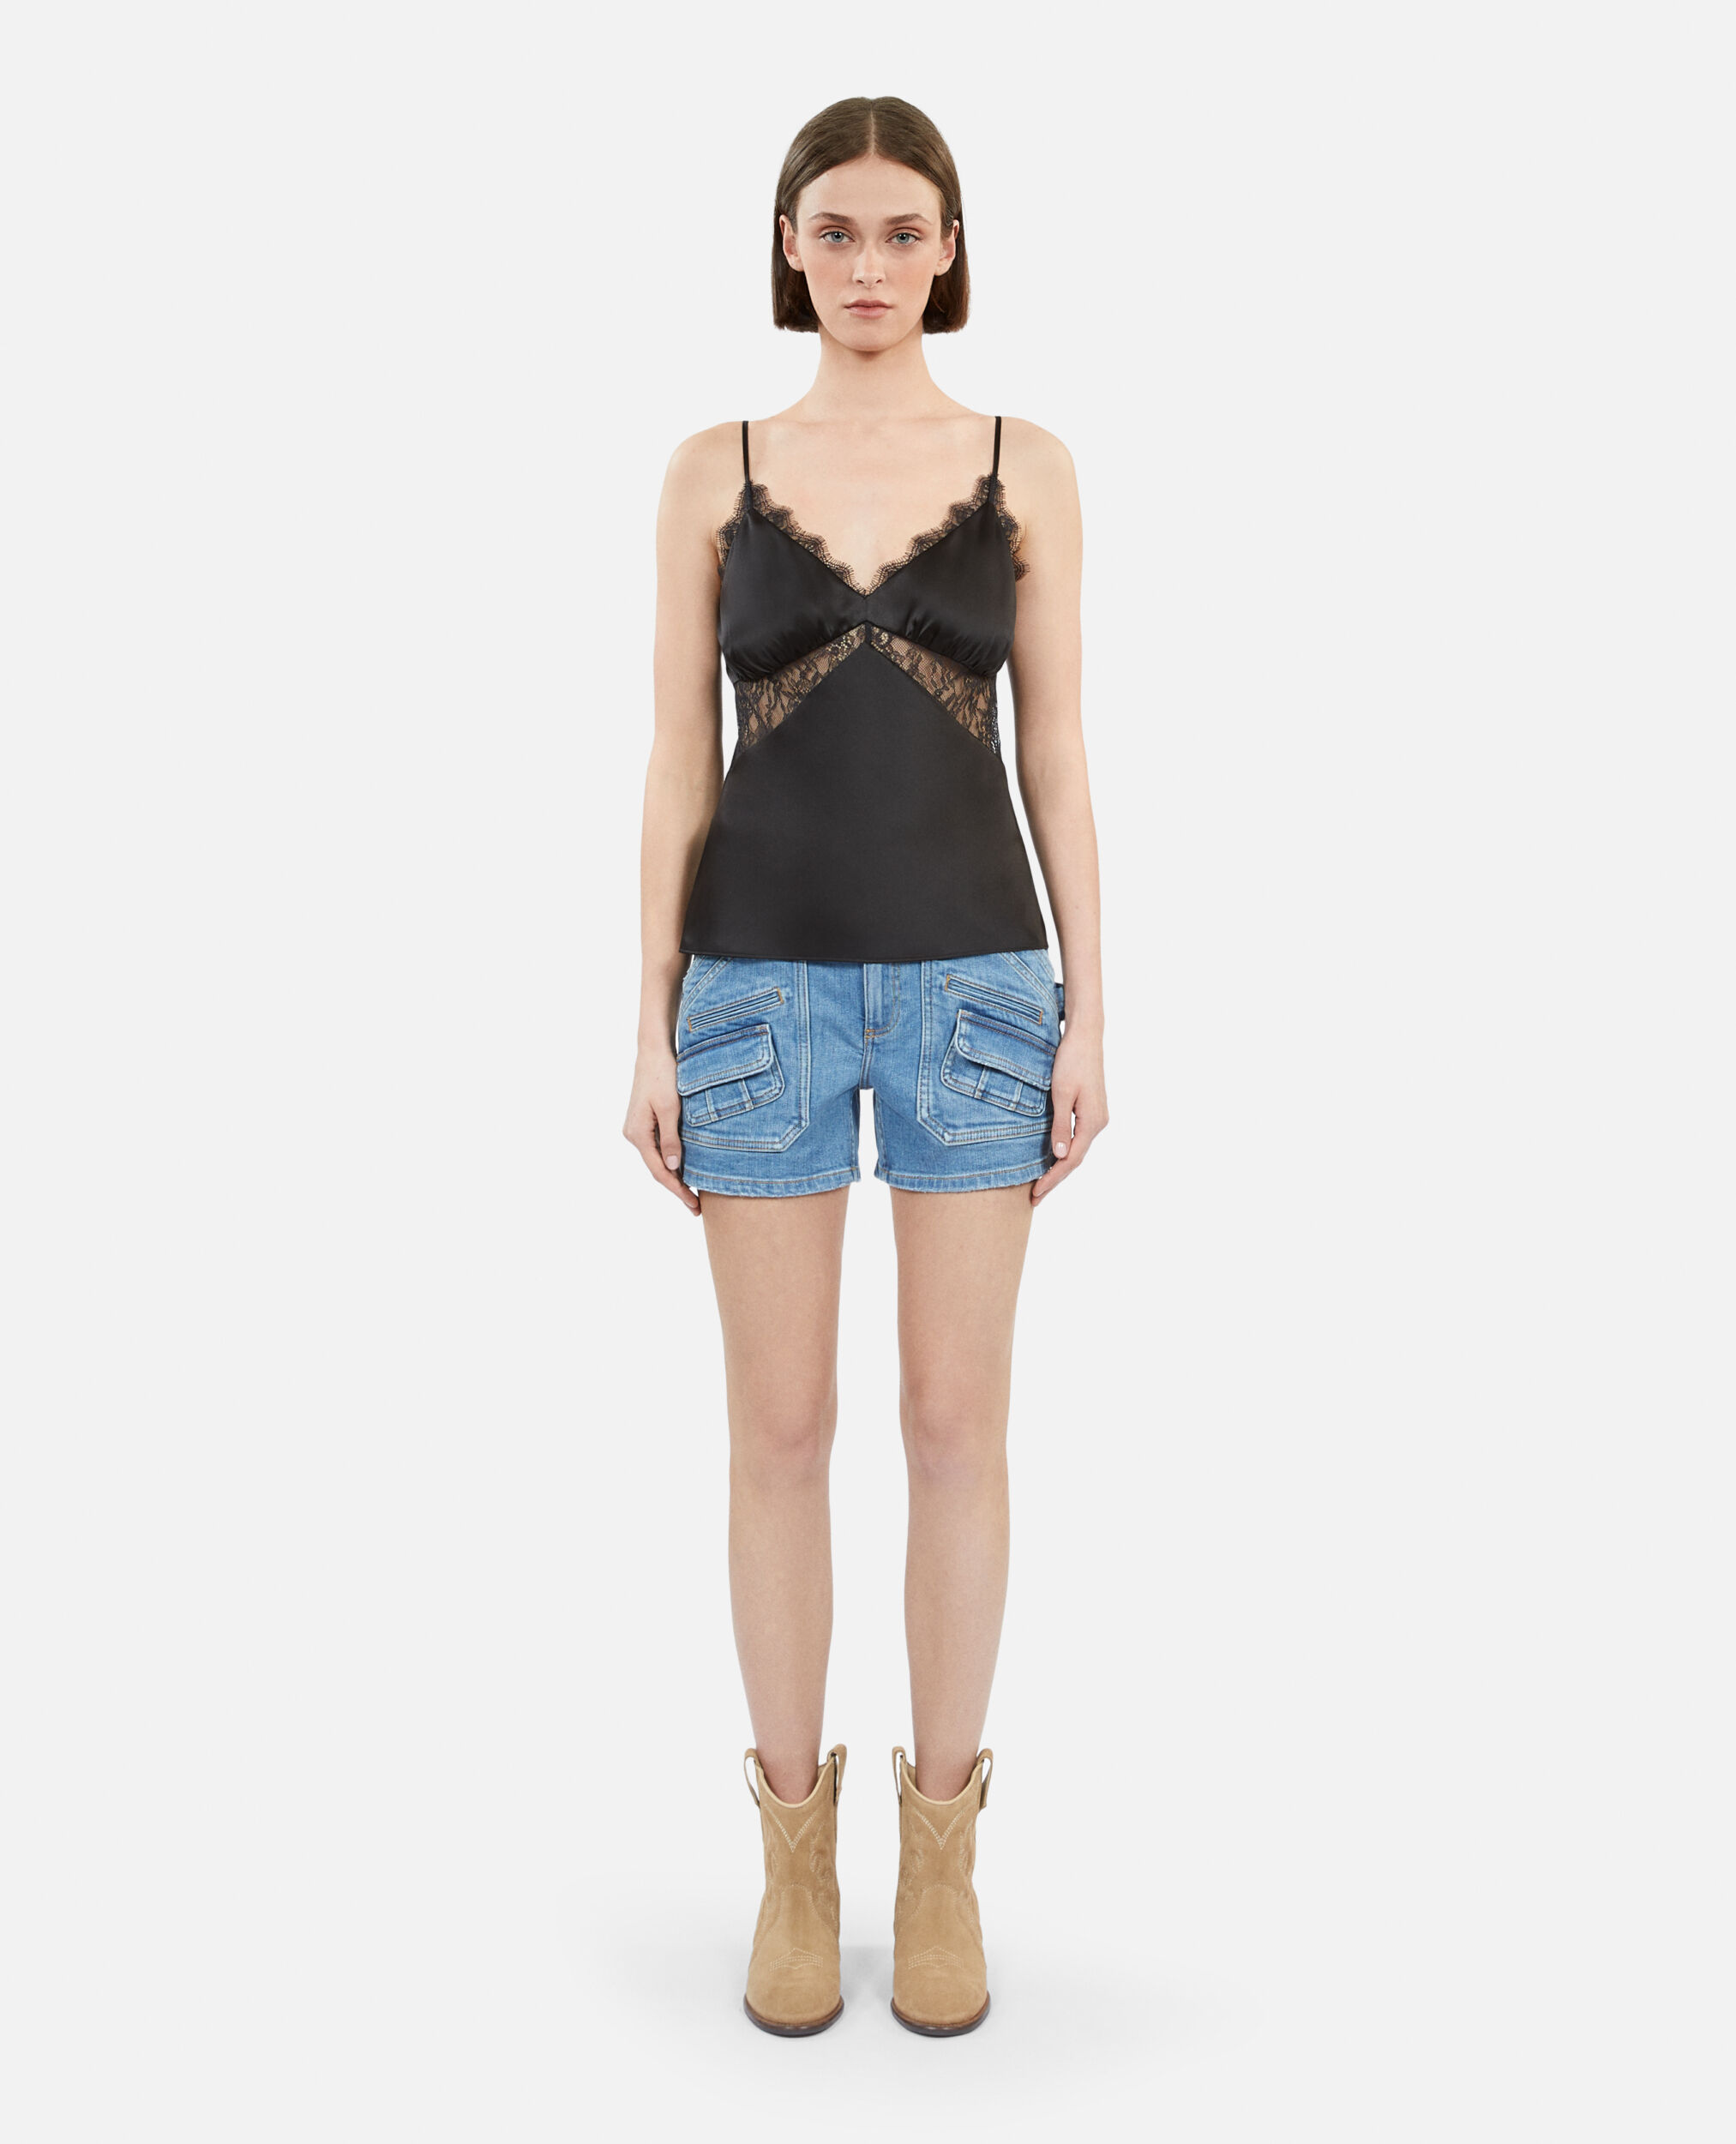 Black silk camisole with lace, BLACK, hi-res image number null